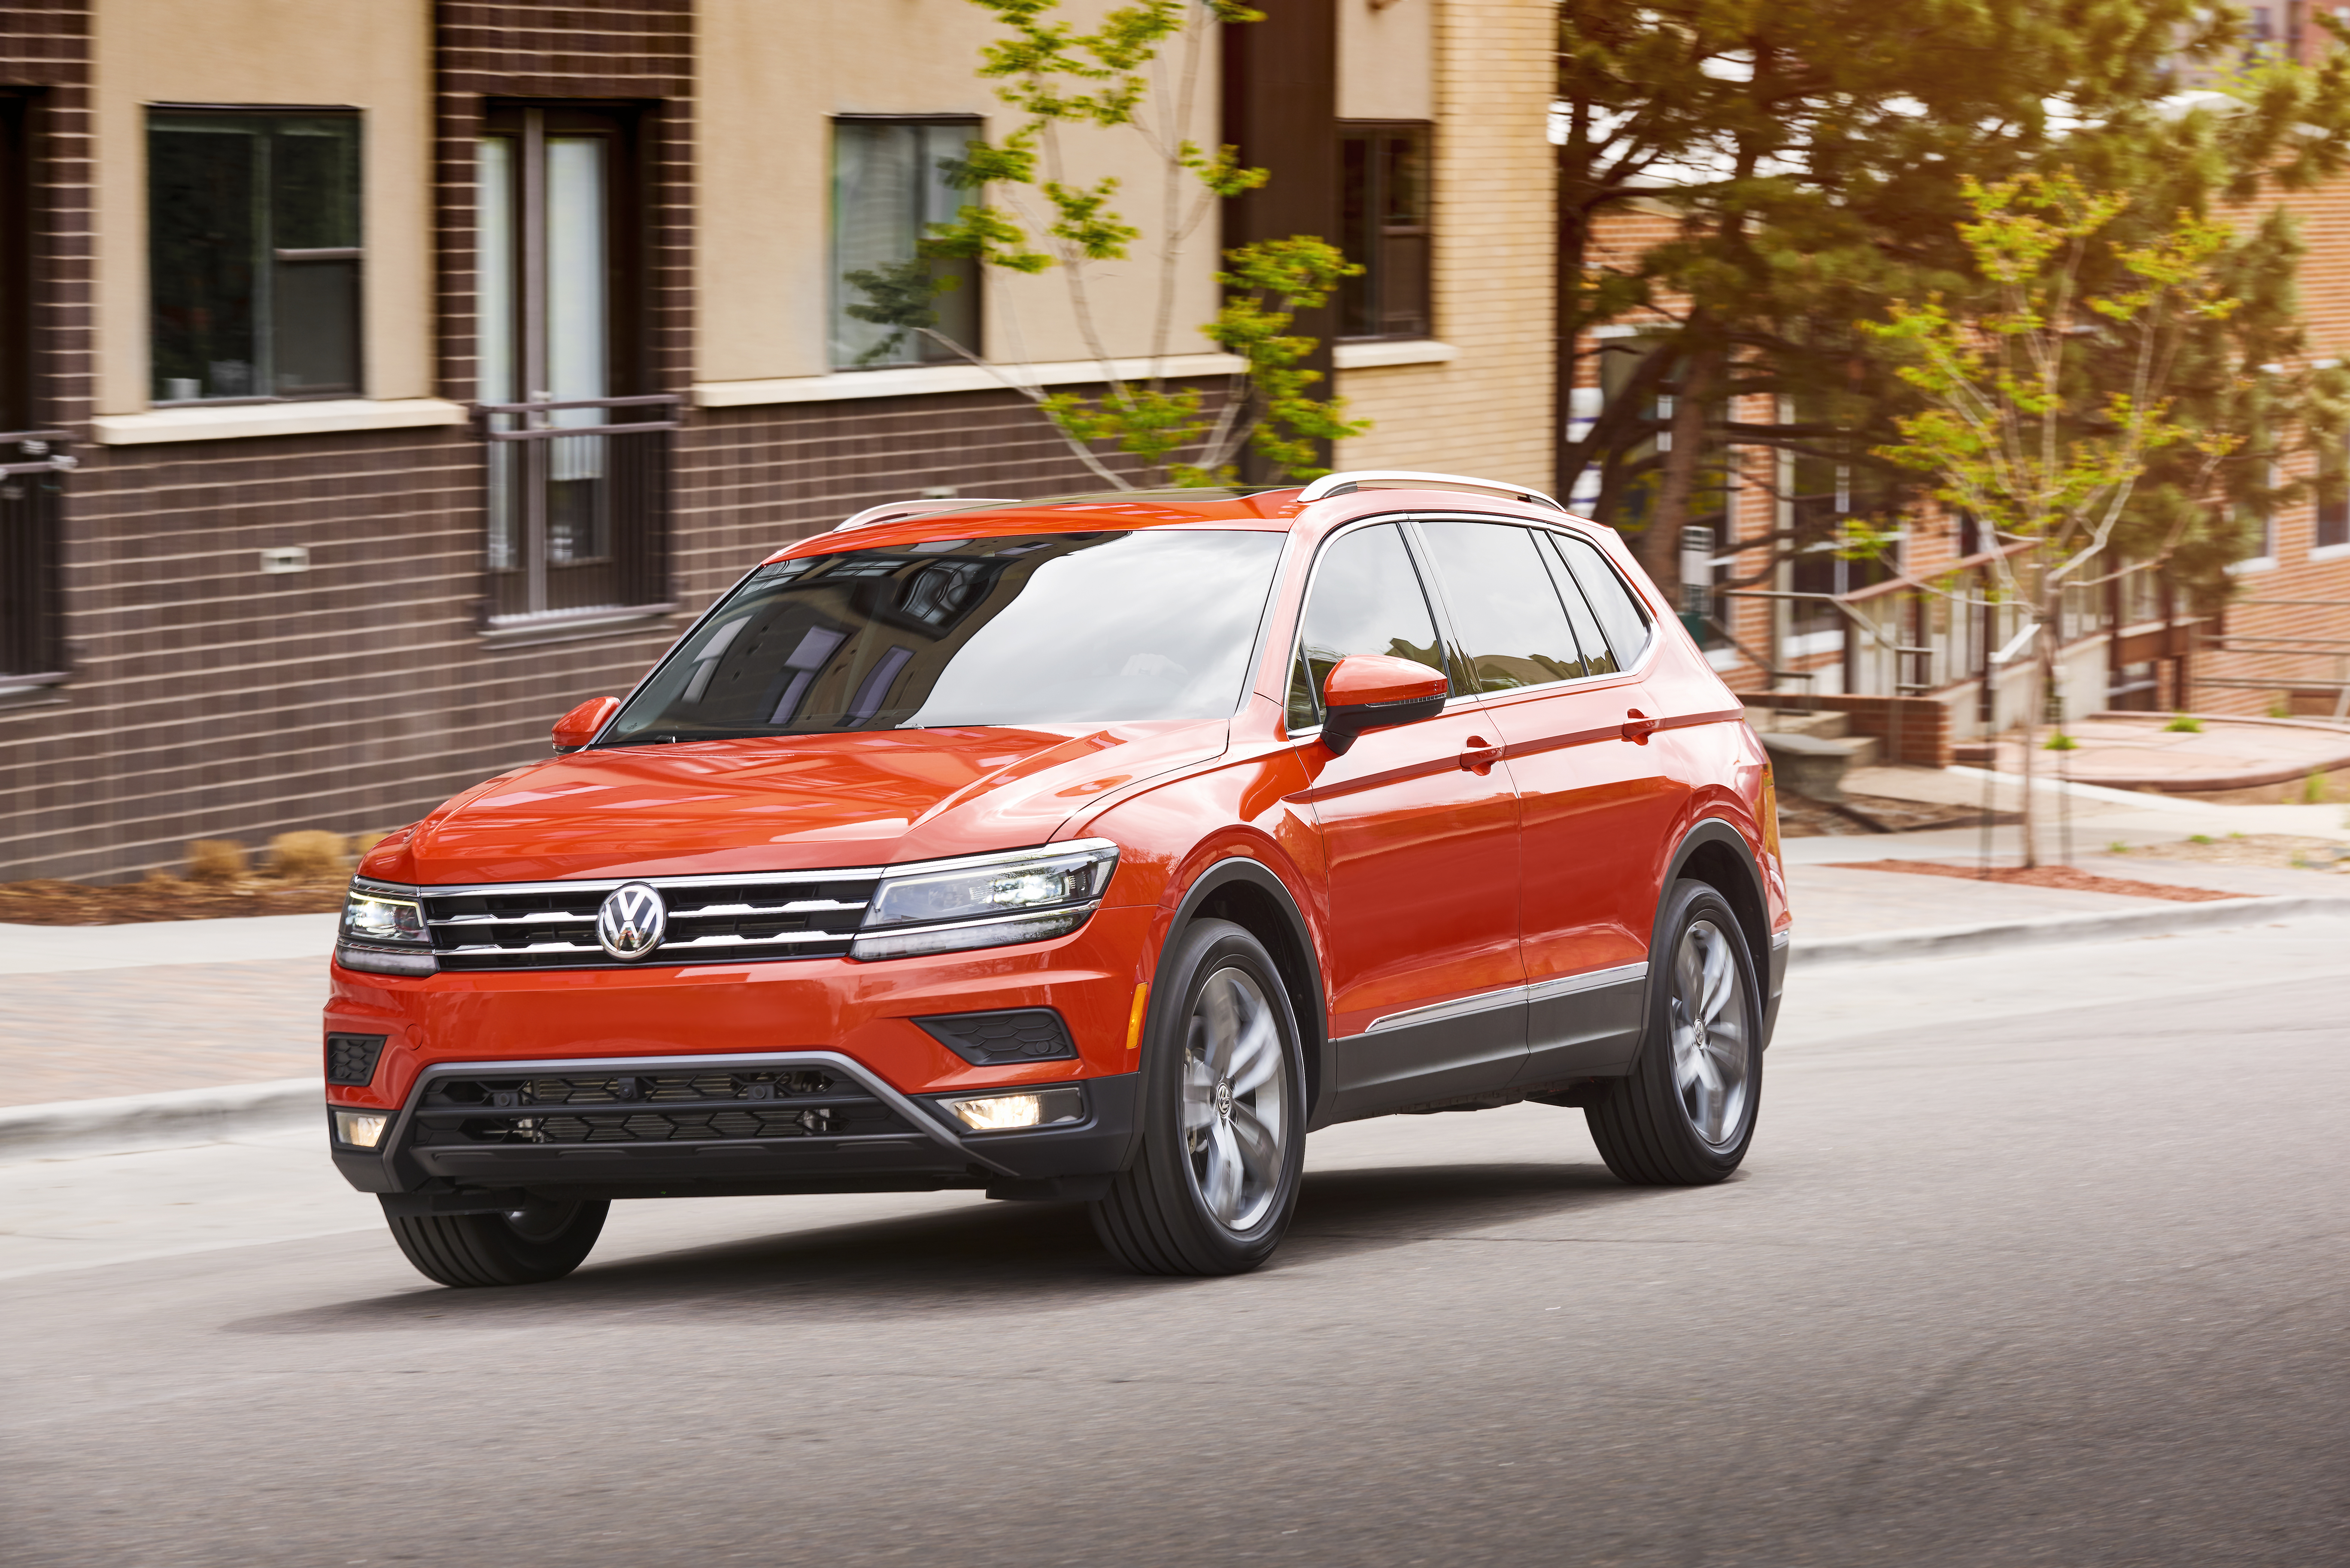 2018 Volkswagen Tiguan - The Perfect Sporty Family Car